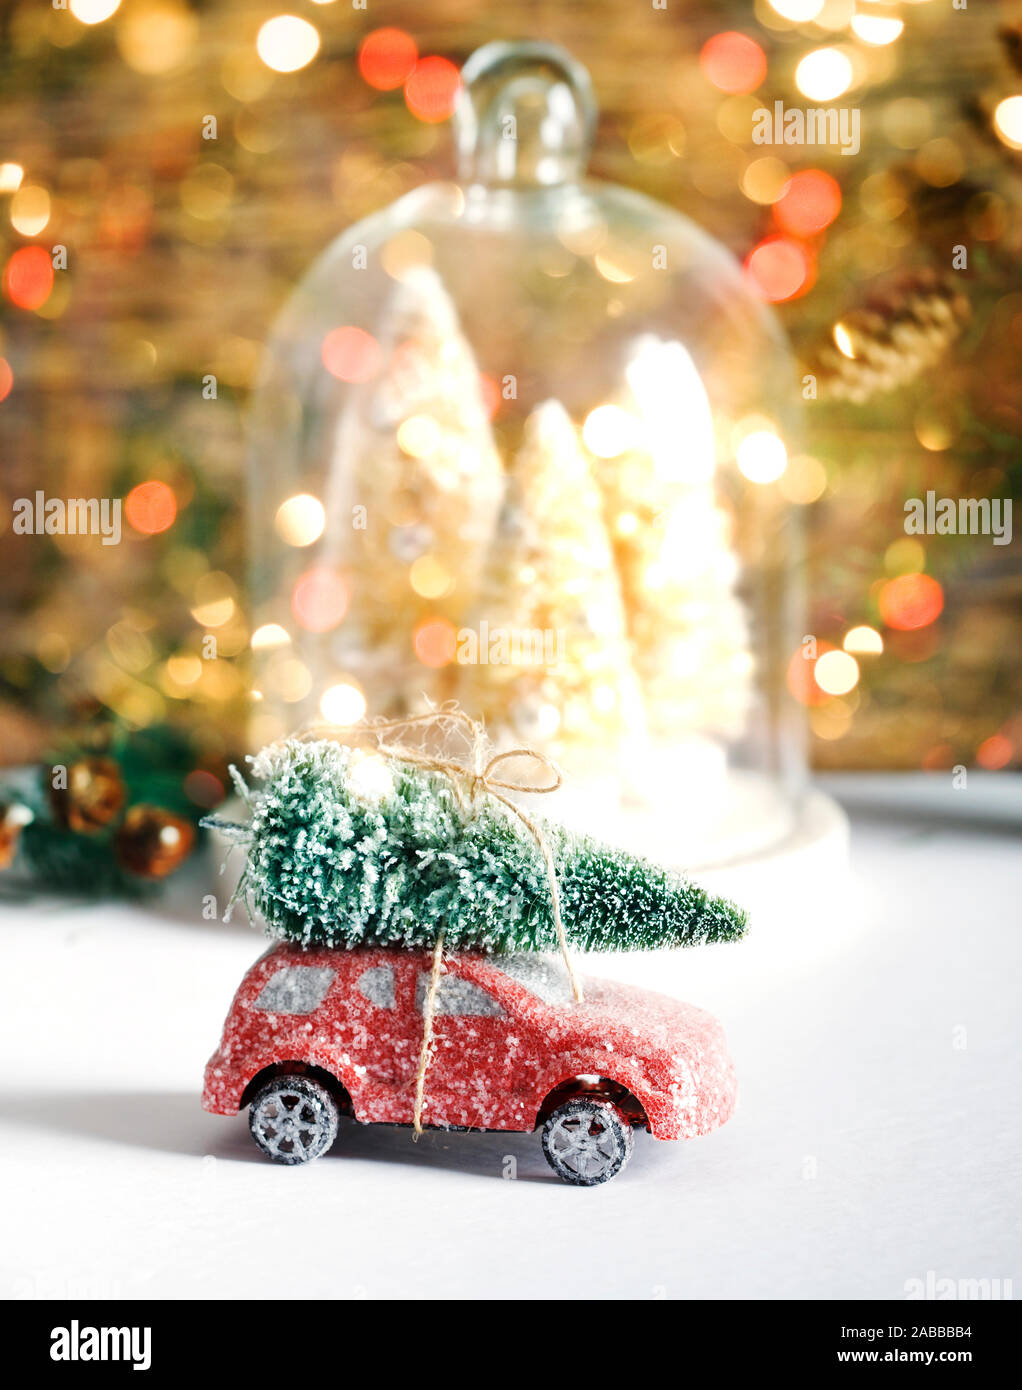 Christmas decoration in a domed tray next to a toy car with a Christmas tree on the roof Stock Photo